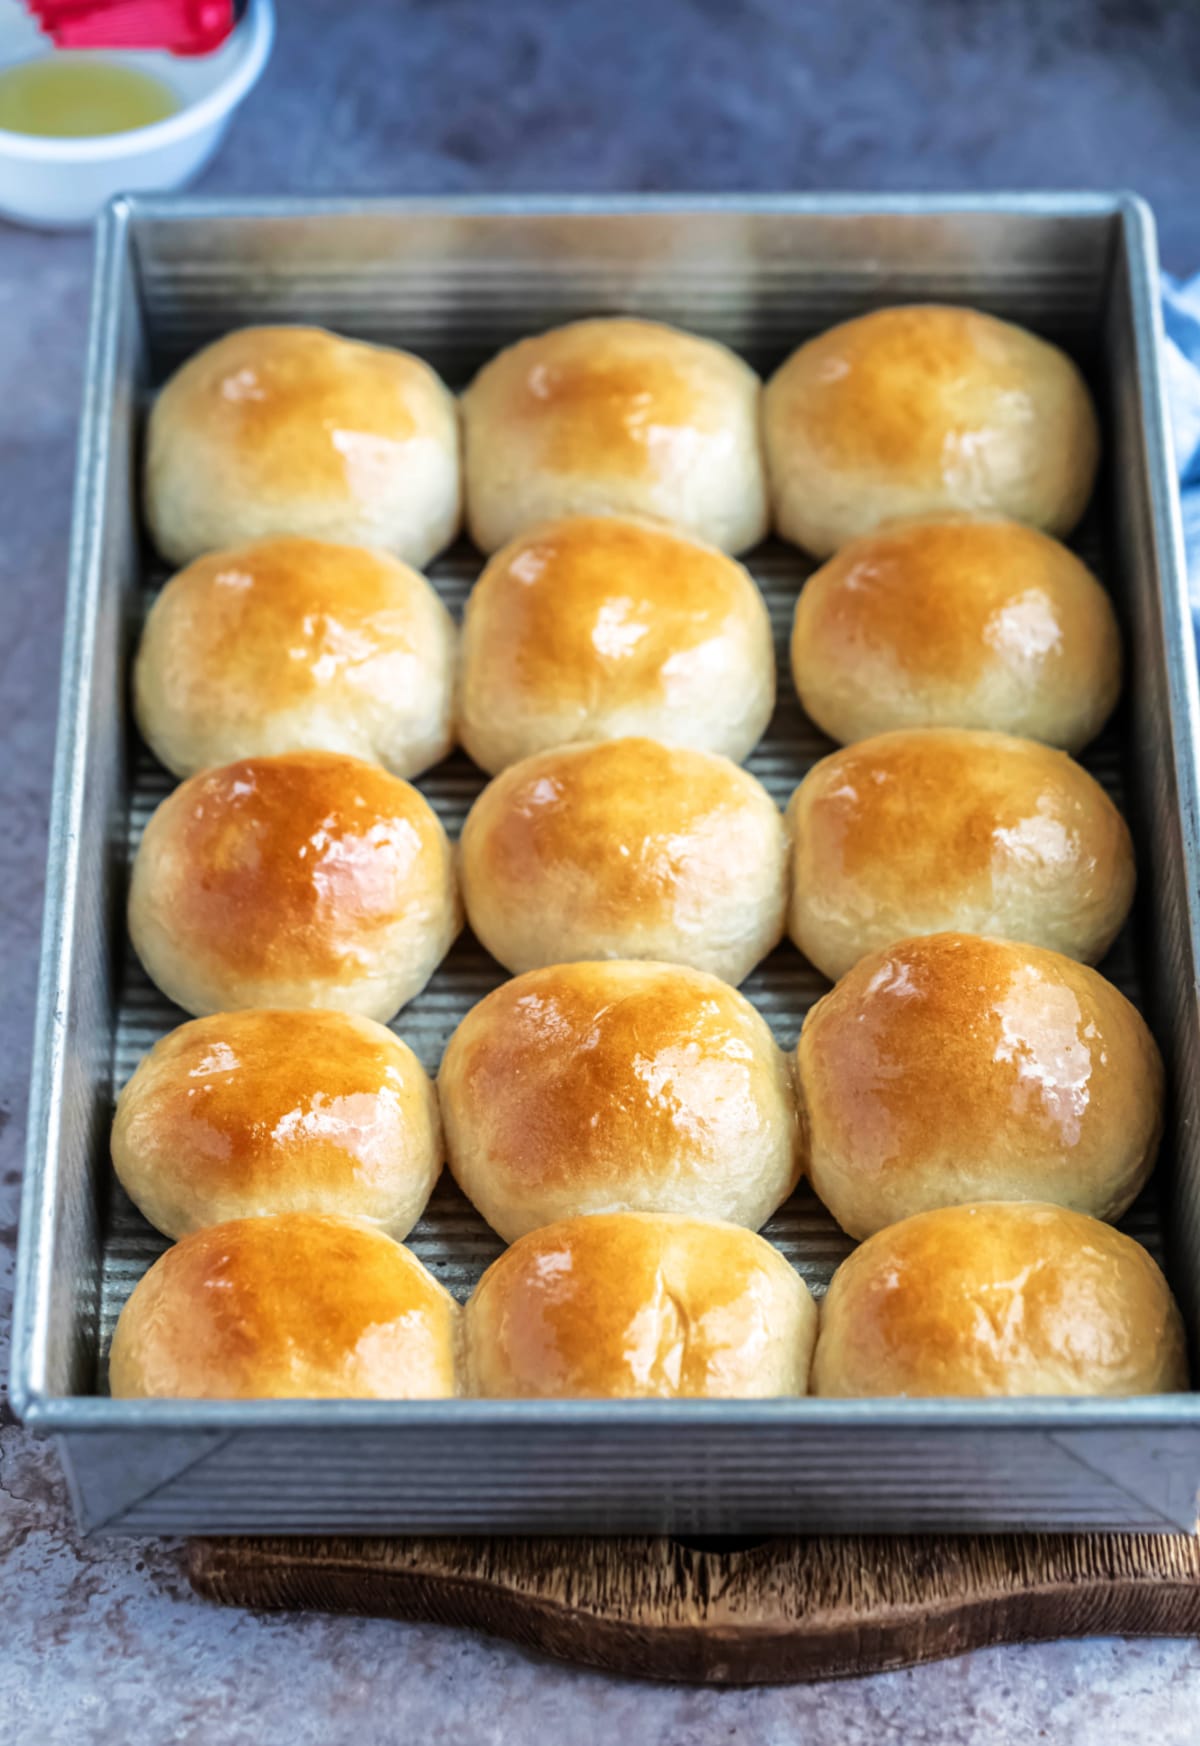 Pan of whole wheat dinner rolls on a wooden cutting board